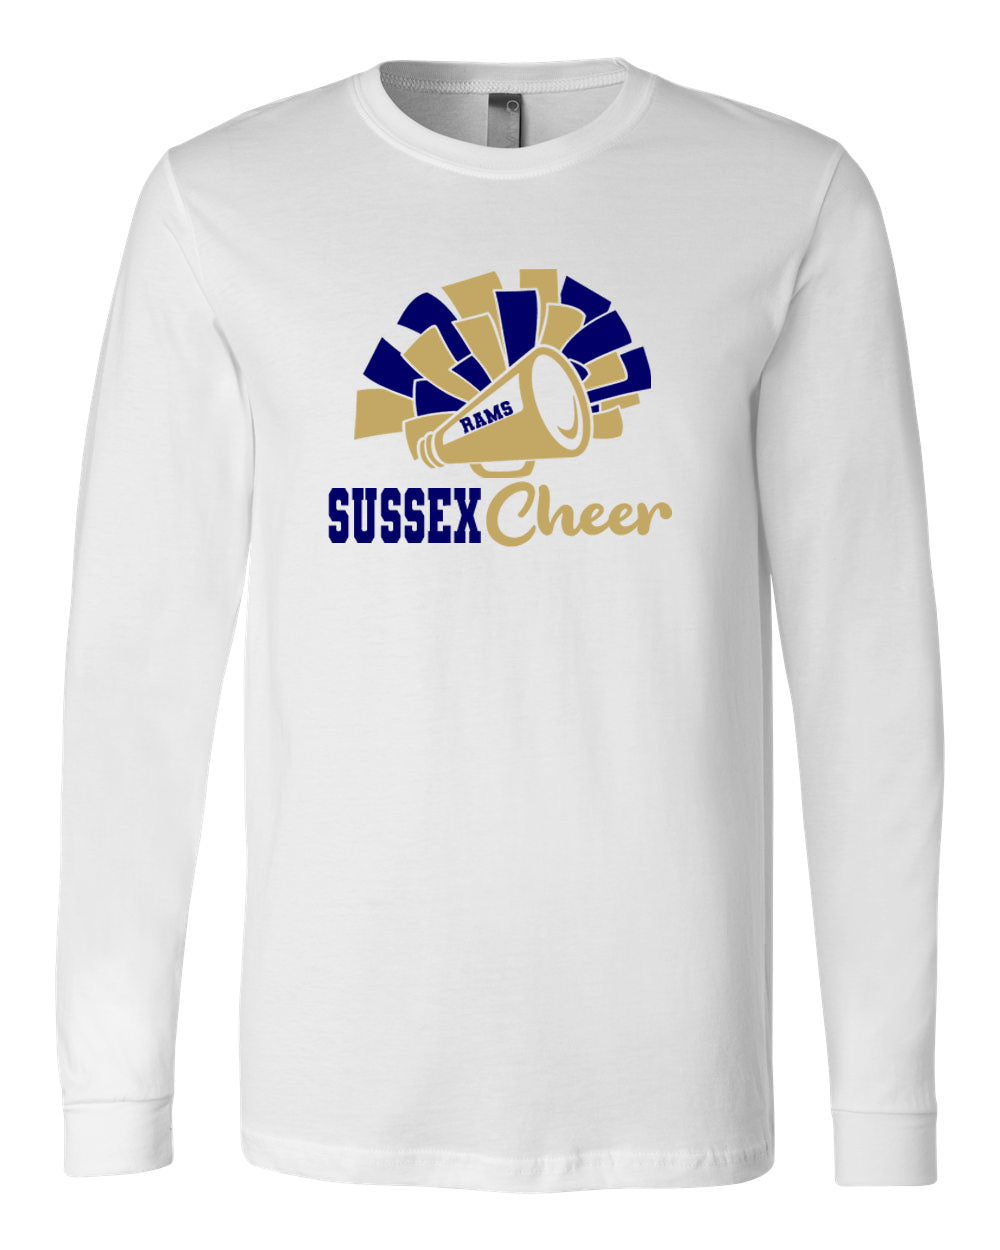 Sussex Middle Cheer Design 2 Long Sleeve Shirt